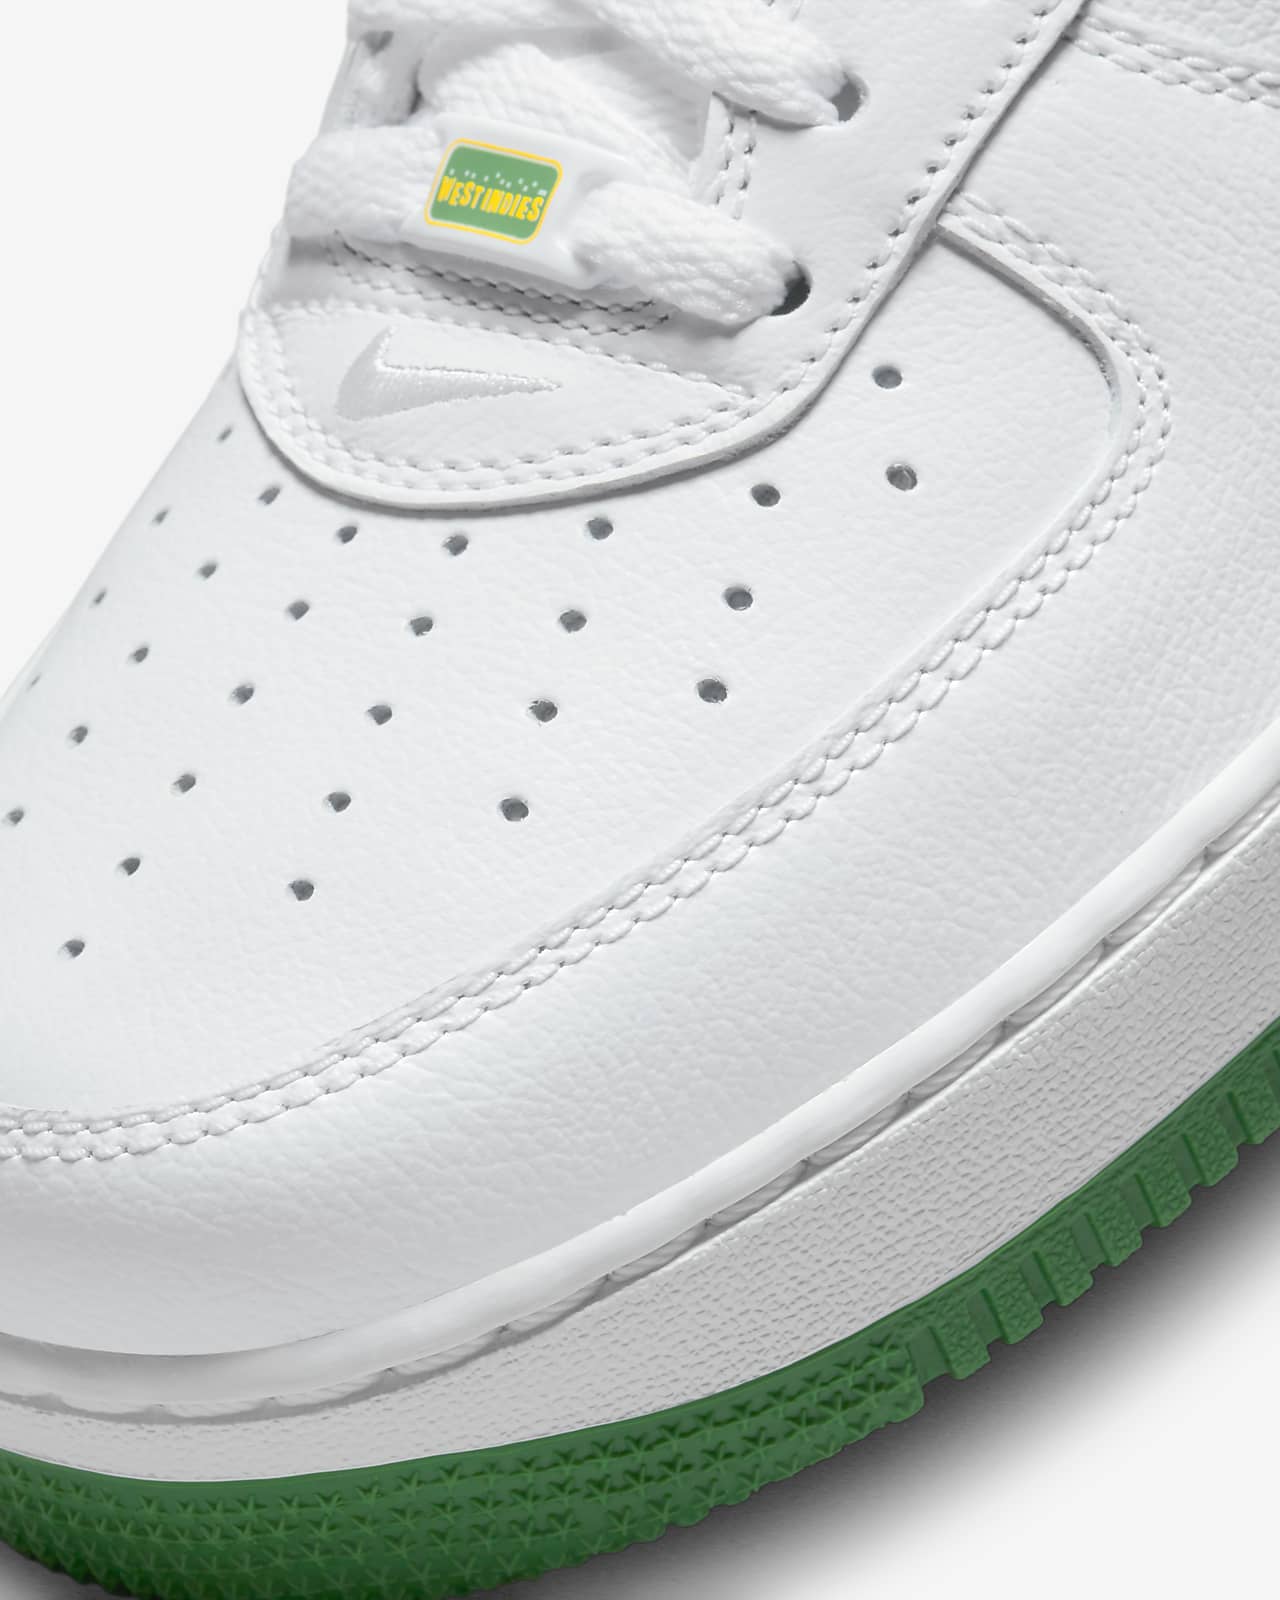 Nike Air Force 1 Low Retro QS Sneakers in White/Classic Green, Size UK 4.5 | End Clothing